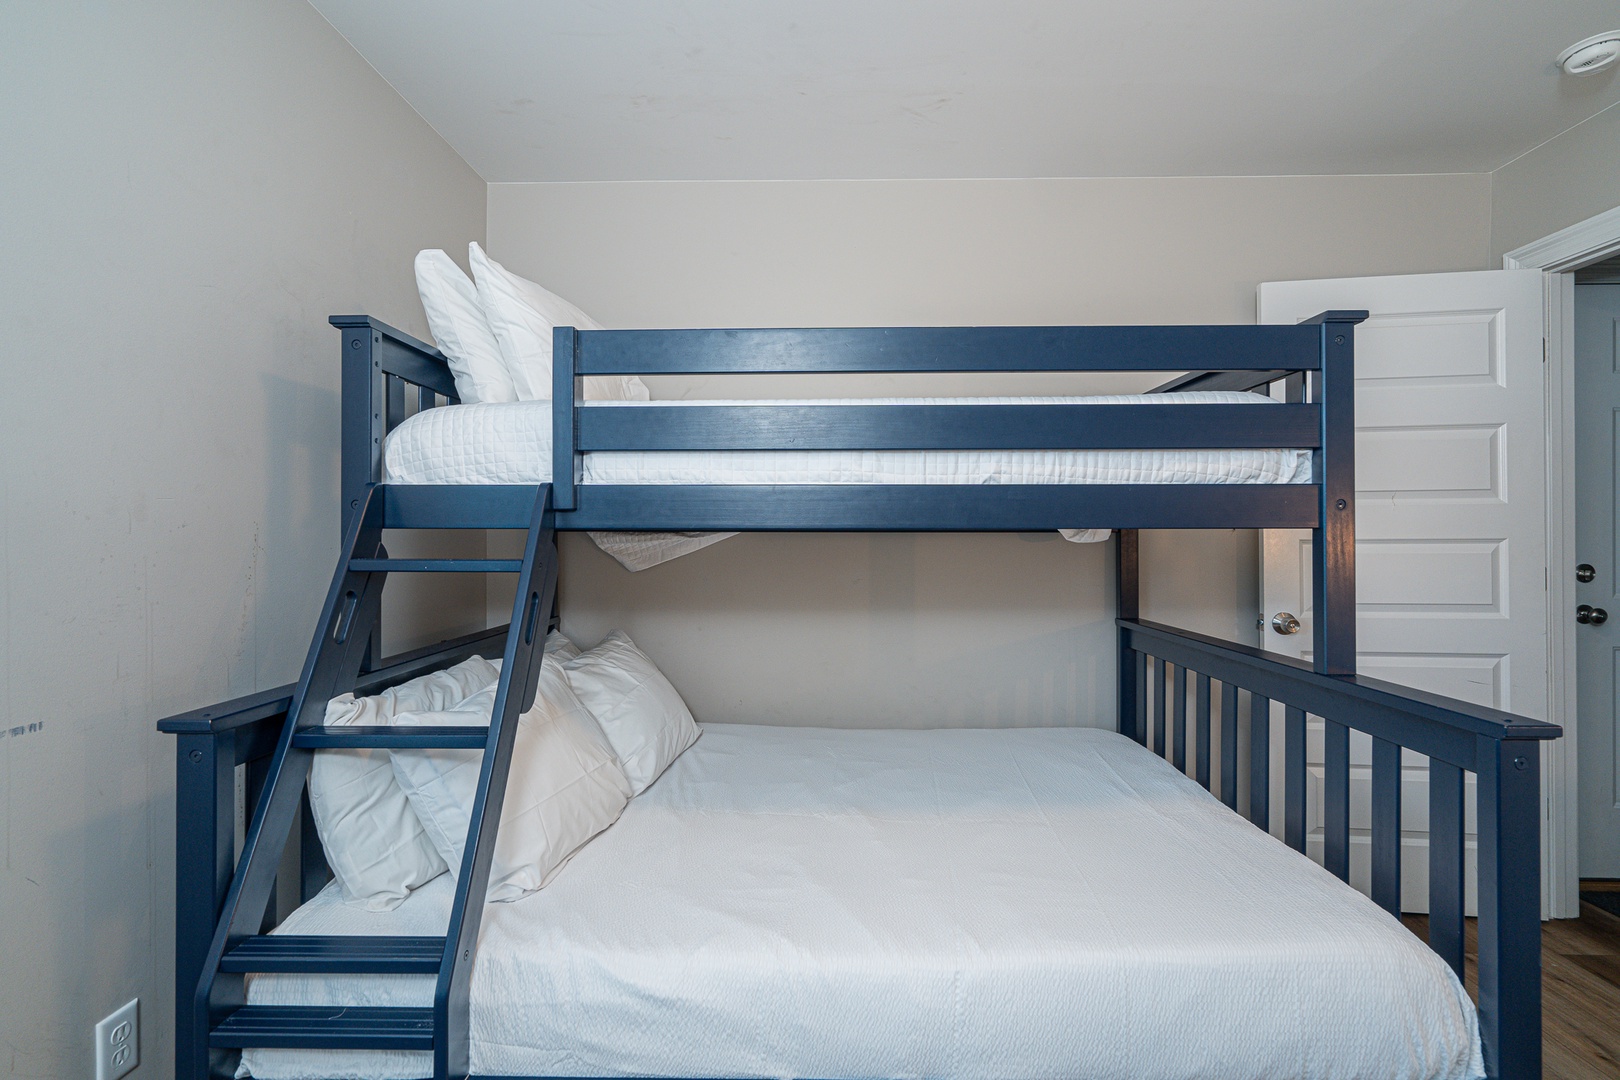 This 2nd floor bedroom offers a twin-over-full bunkbed & twin trundle